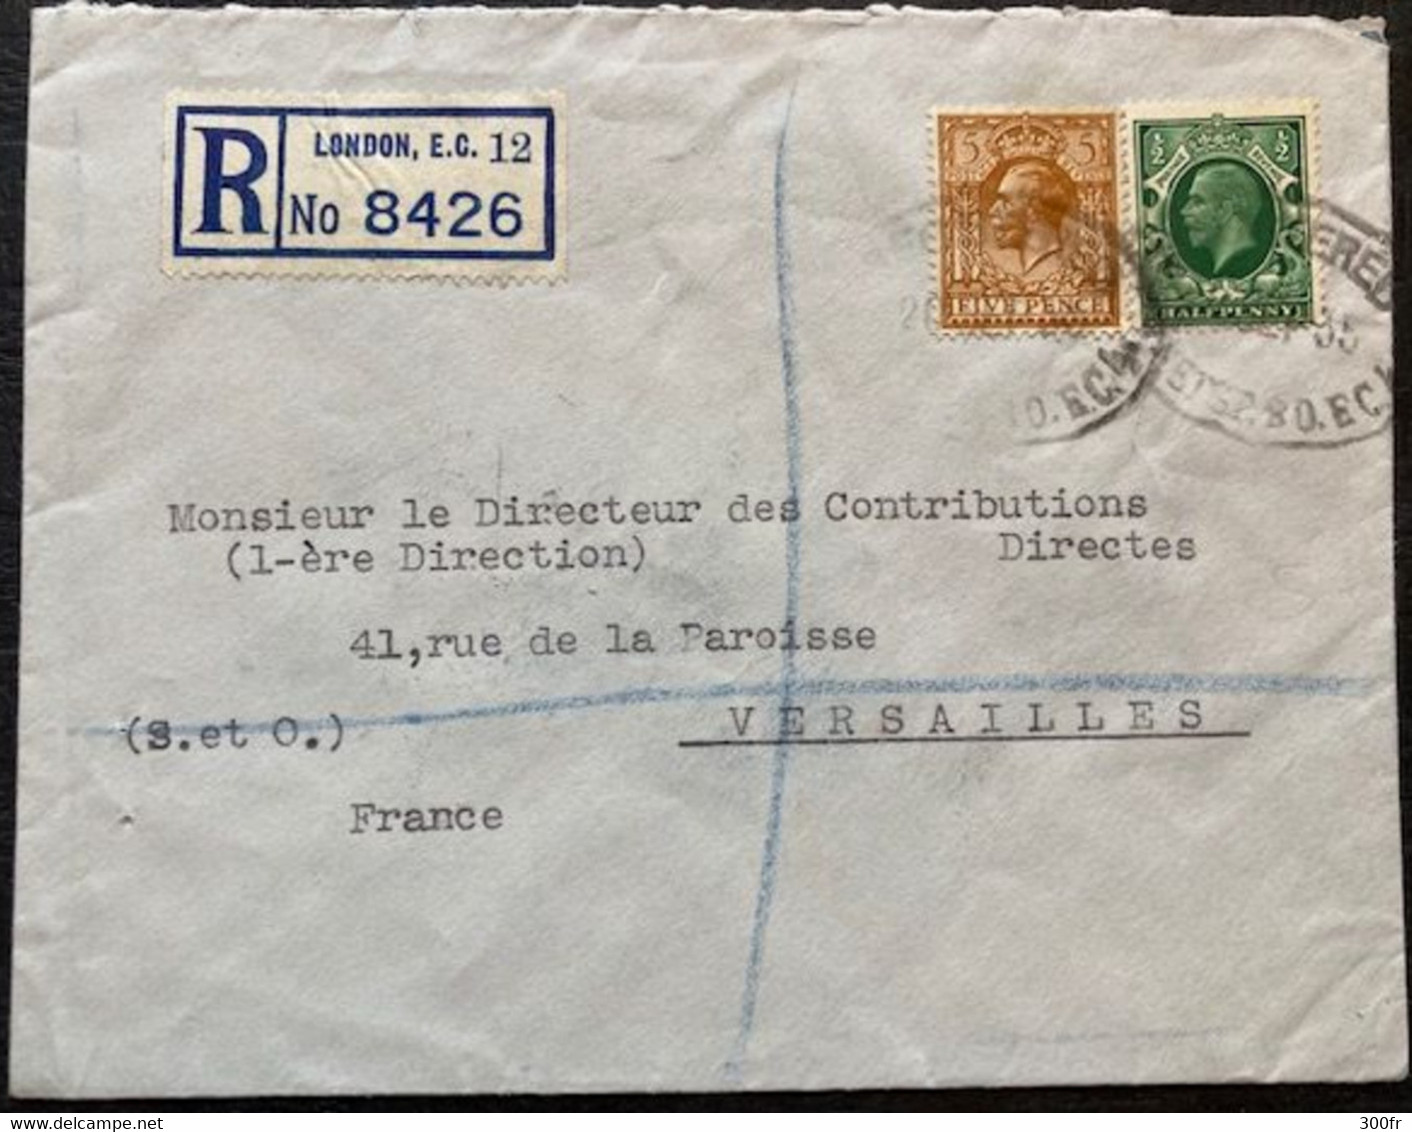 1935 LETTRE RECOMMANDEE REGISTERED COVER LONDON TO VERSAILLES FRANCE - Ohne Zuordnung